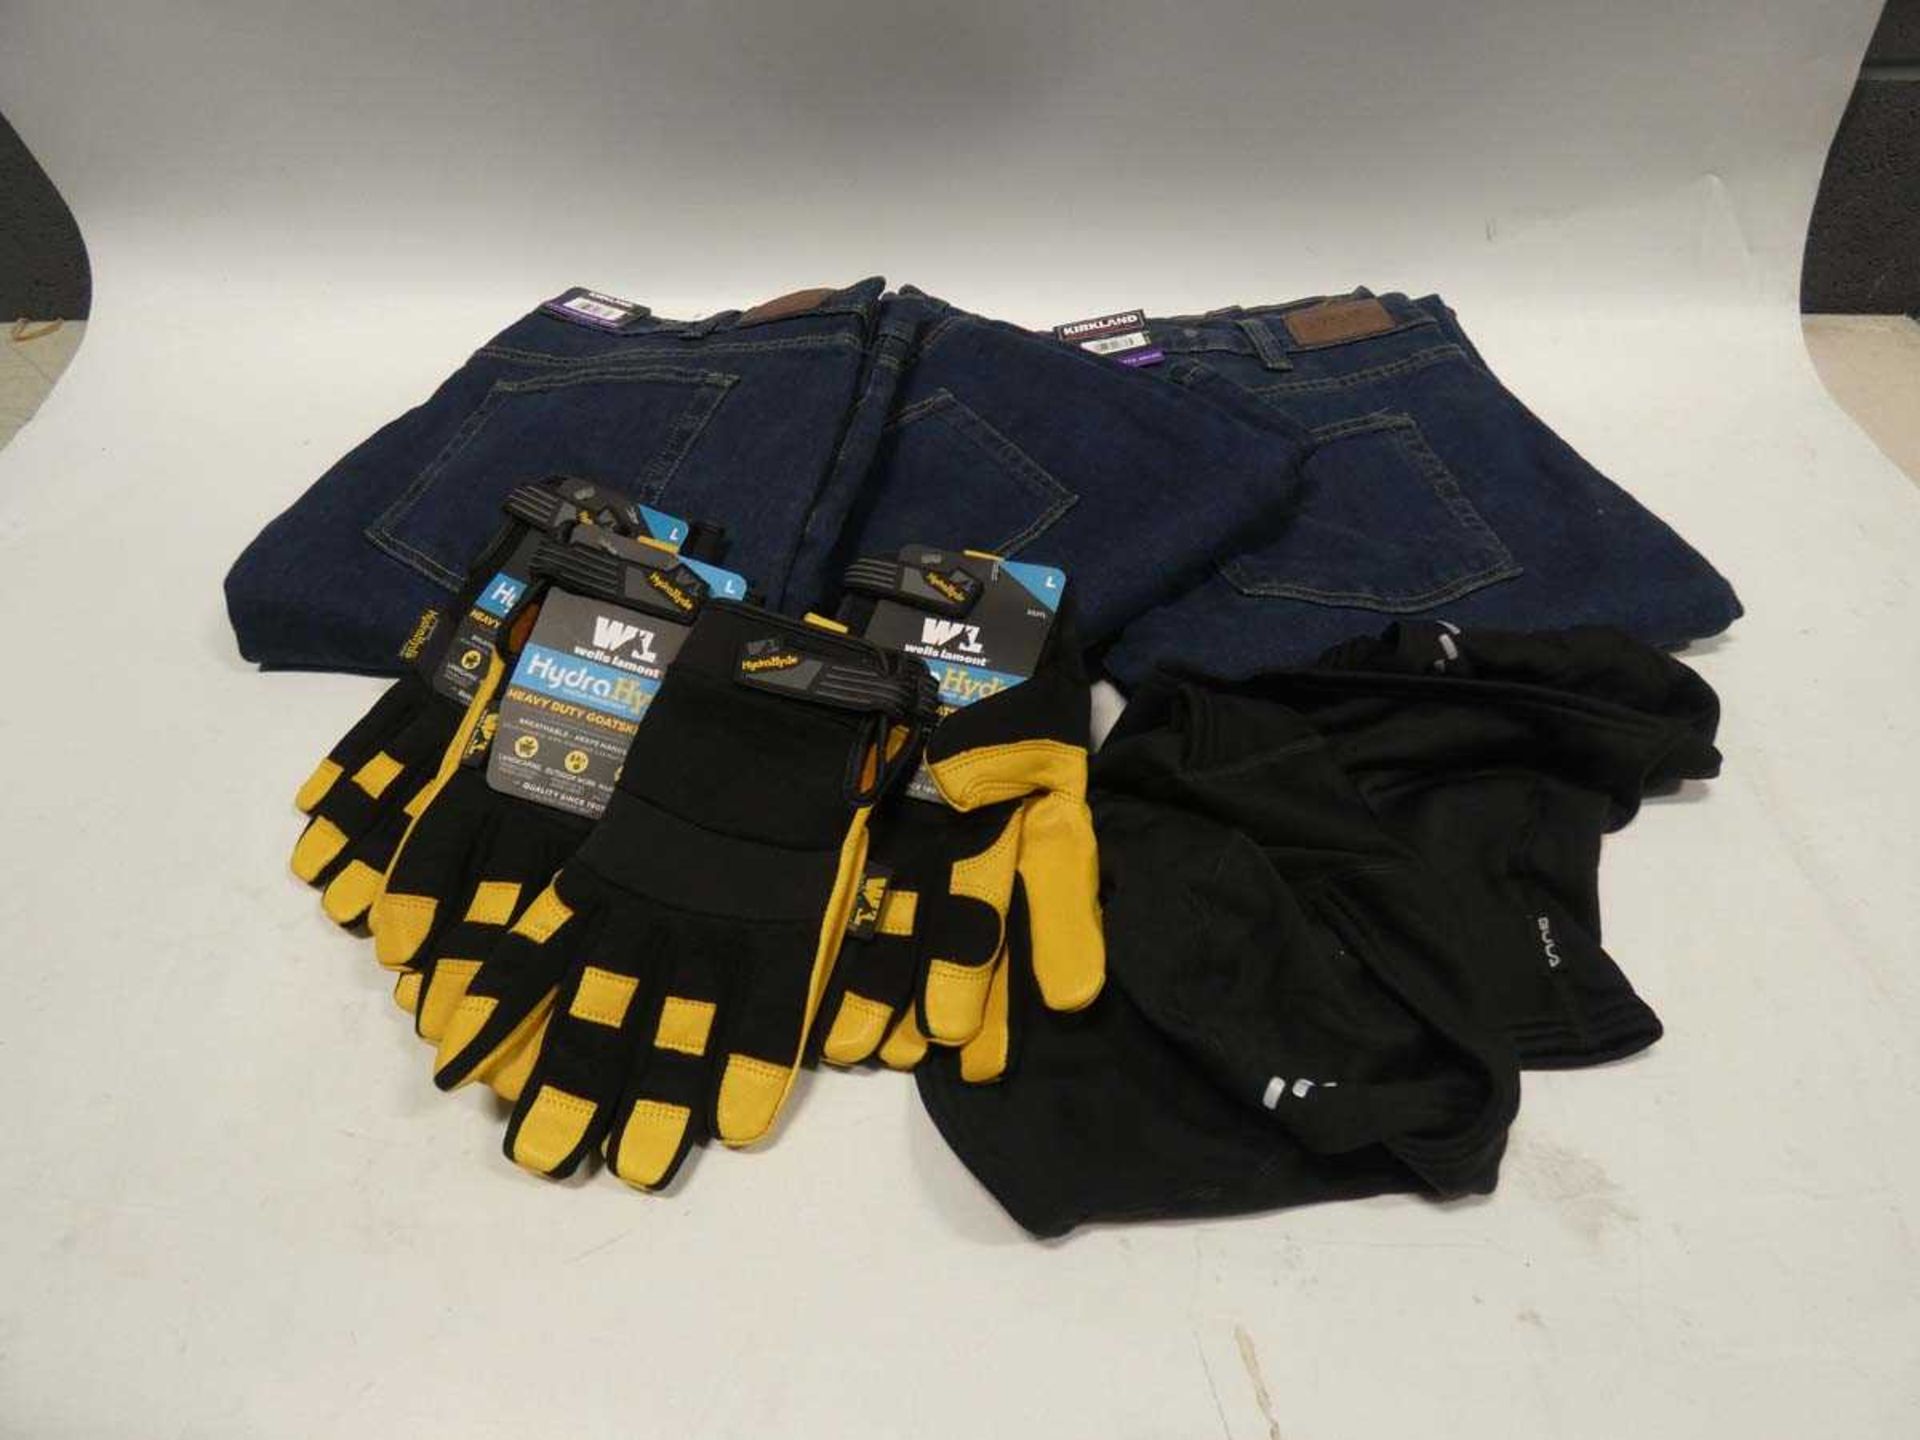 +VAT 3 pairs of Kirkland jeans together with some work gloves and 2 balaclavas